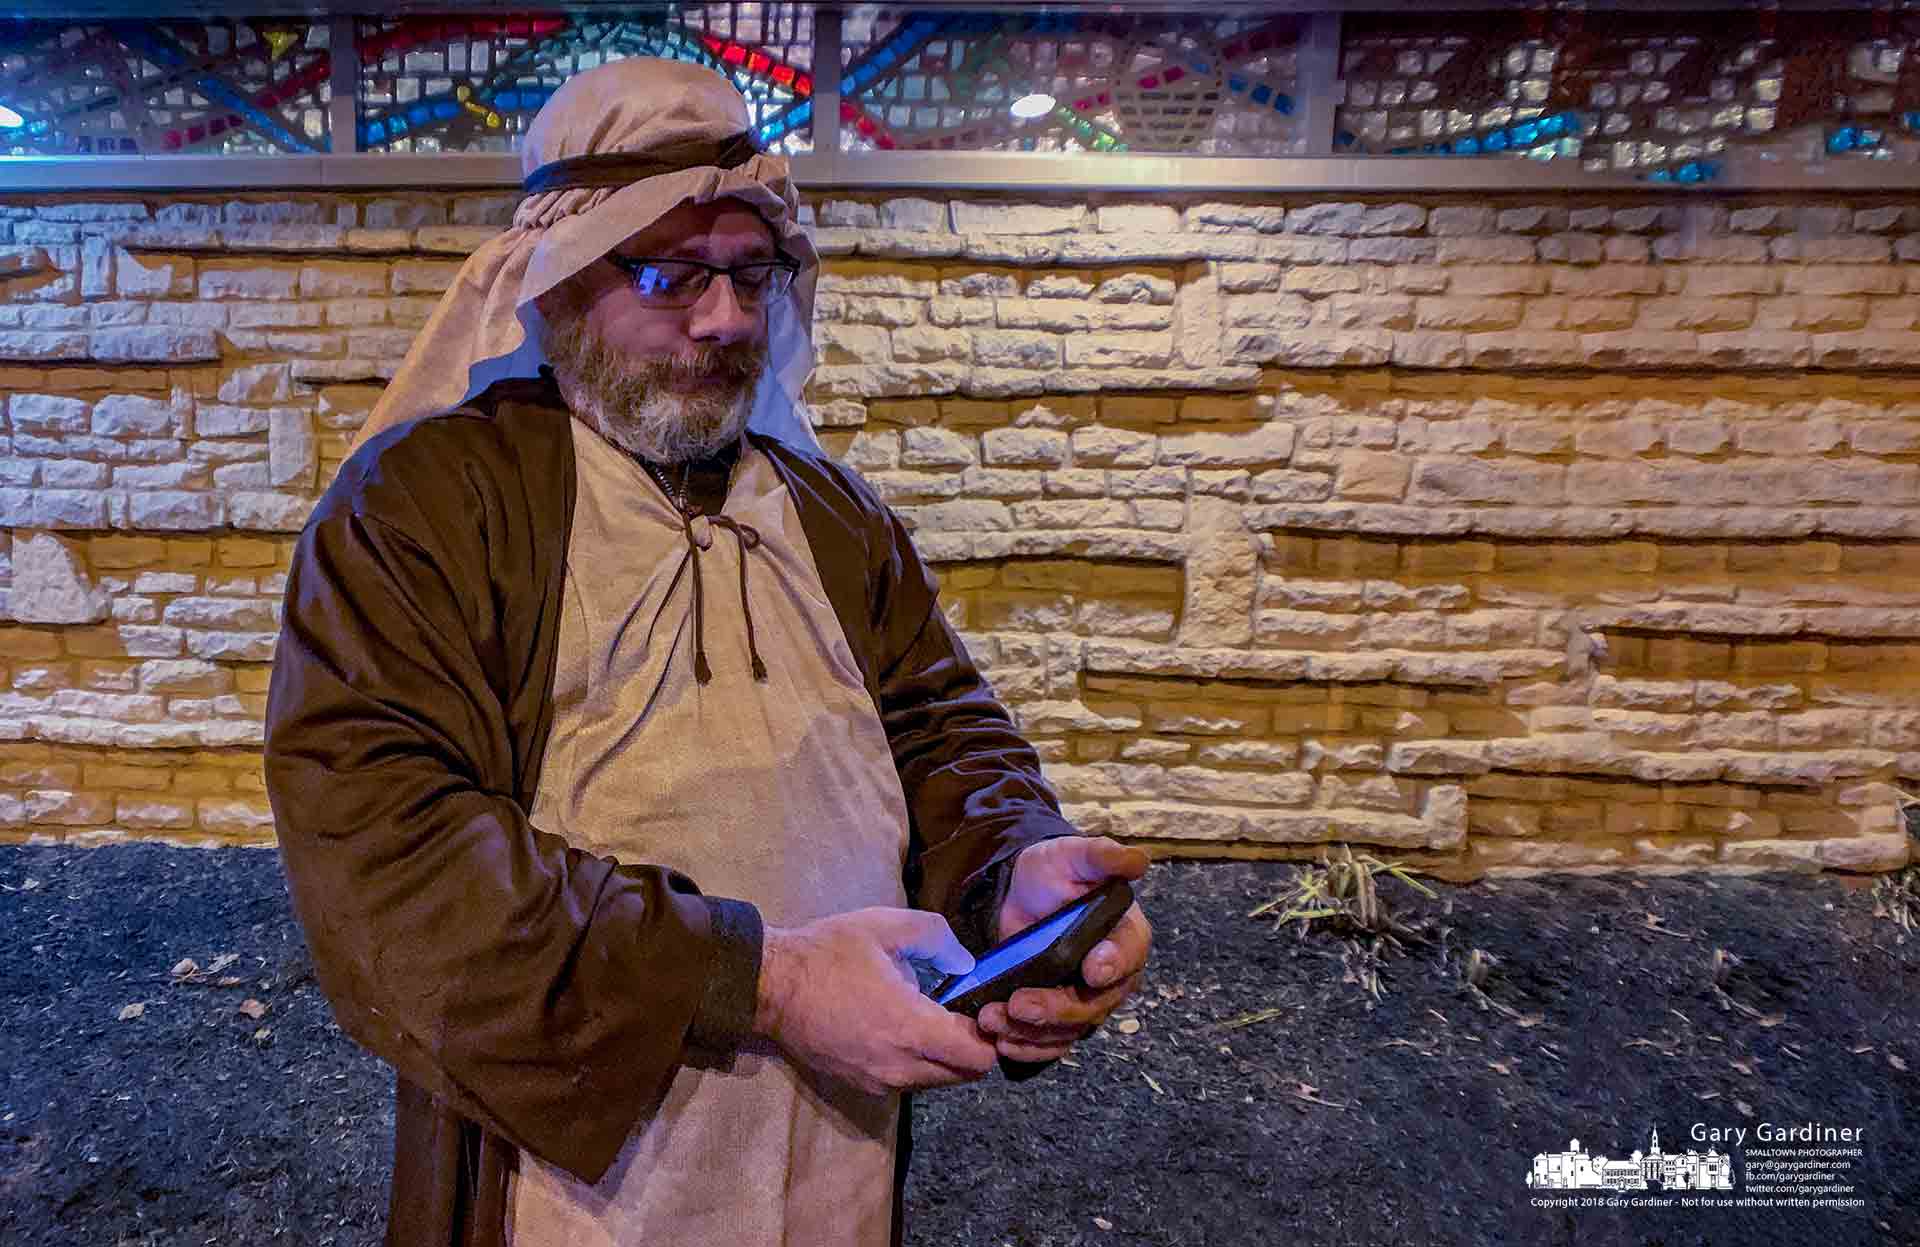 A shepherd takes time to check his smartphone while tending his flock in the living Nativity at the Church of the Messiah on North State Street in Uptown Westerville. My Final Photo for Dec. 14, 2018  